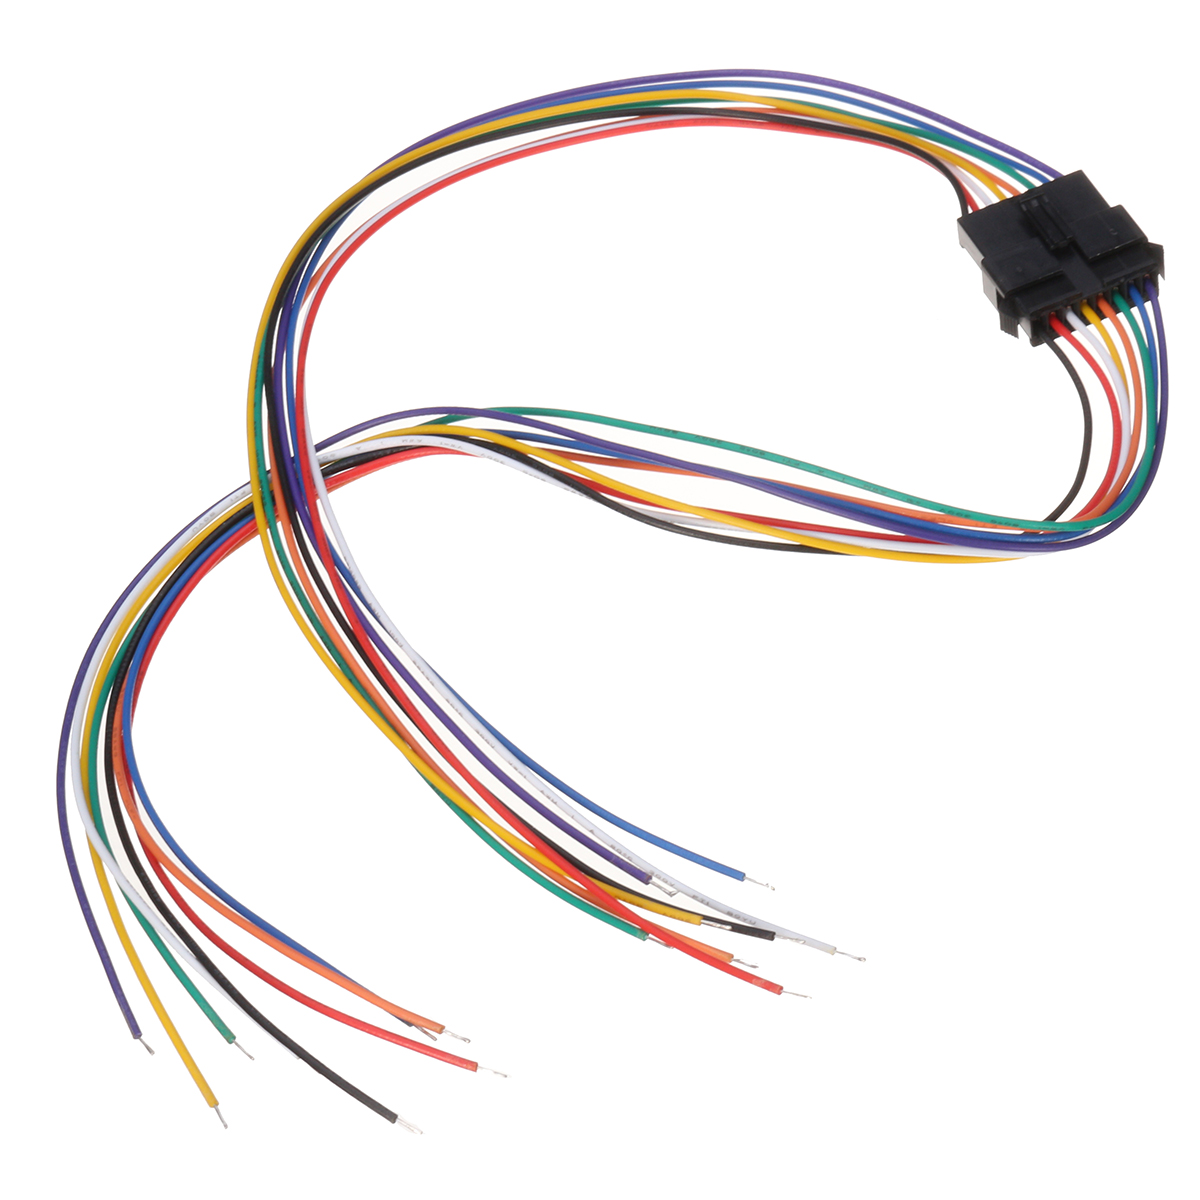 10-Set-Jst-25mm-SM-8-Pin-Male--Female-Connector-Plug-With-Wire-Cable-300mm-1170148-6